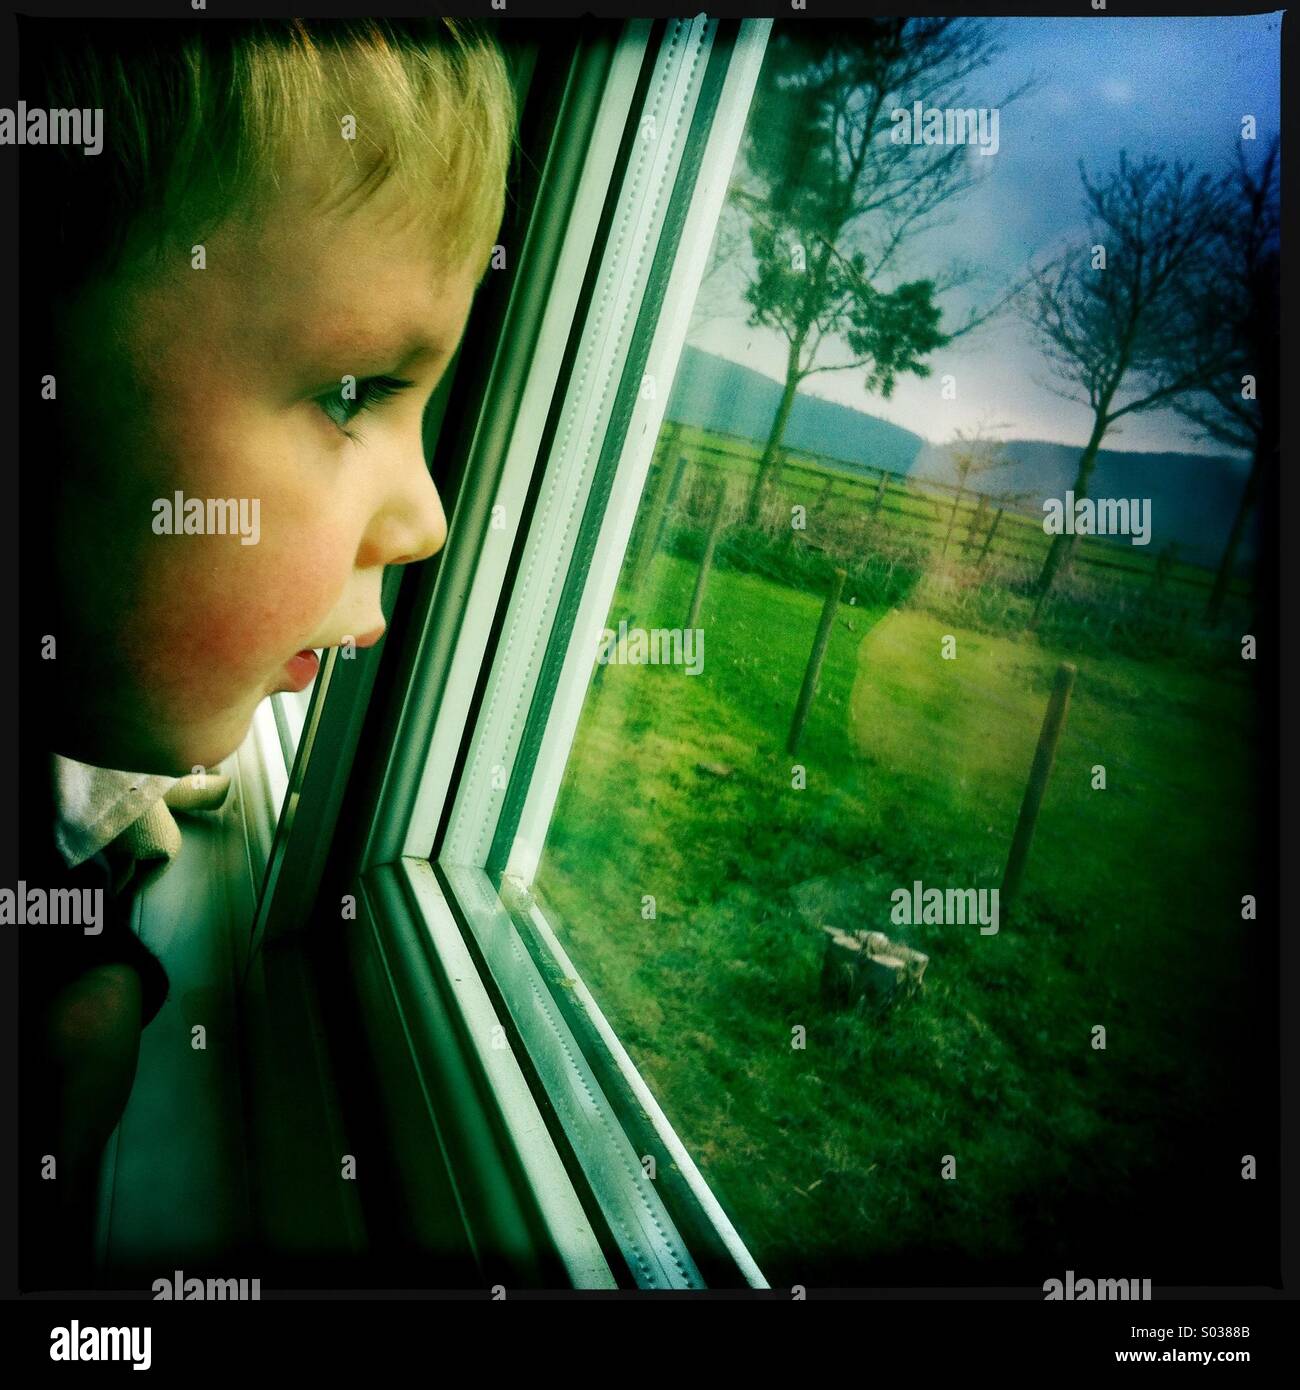 A young boy looking out of a window Stock Photo